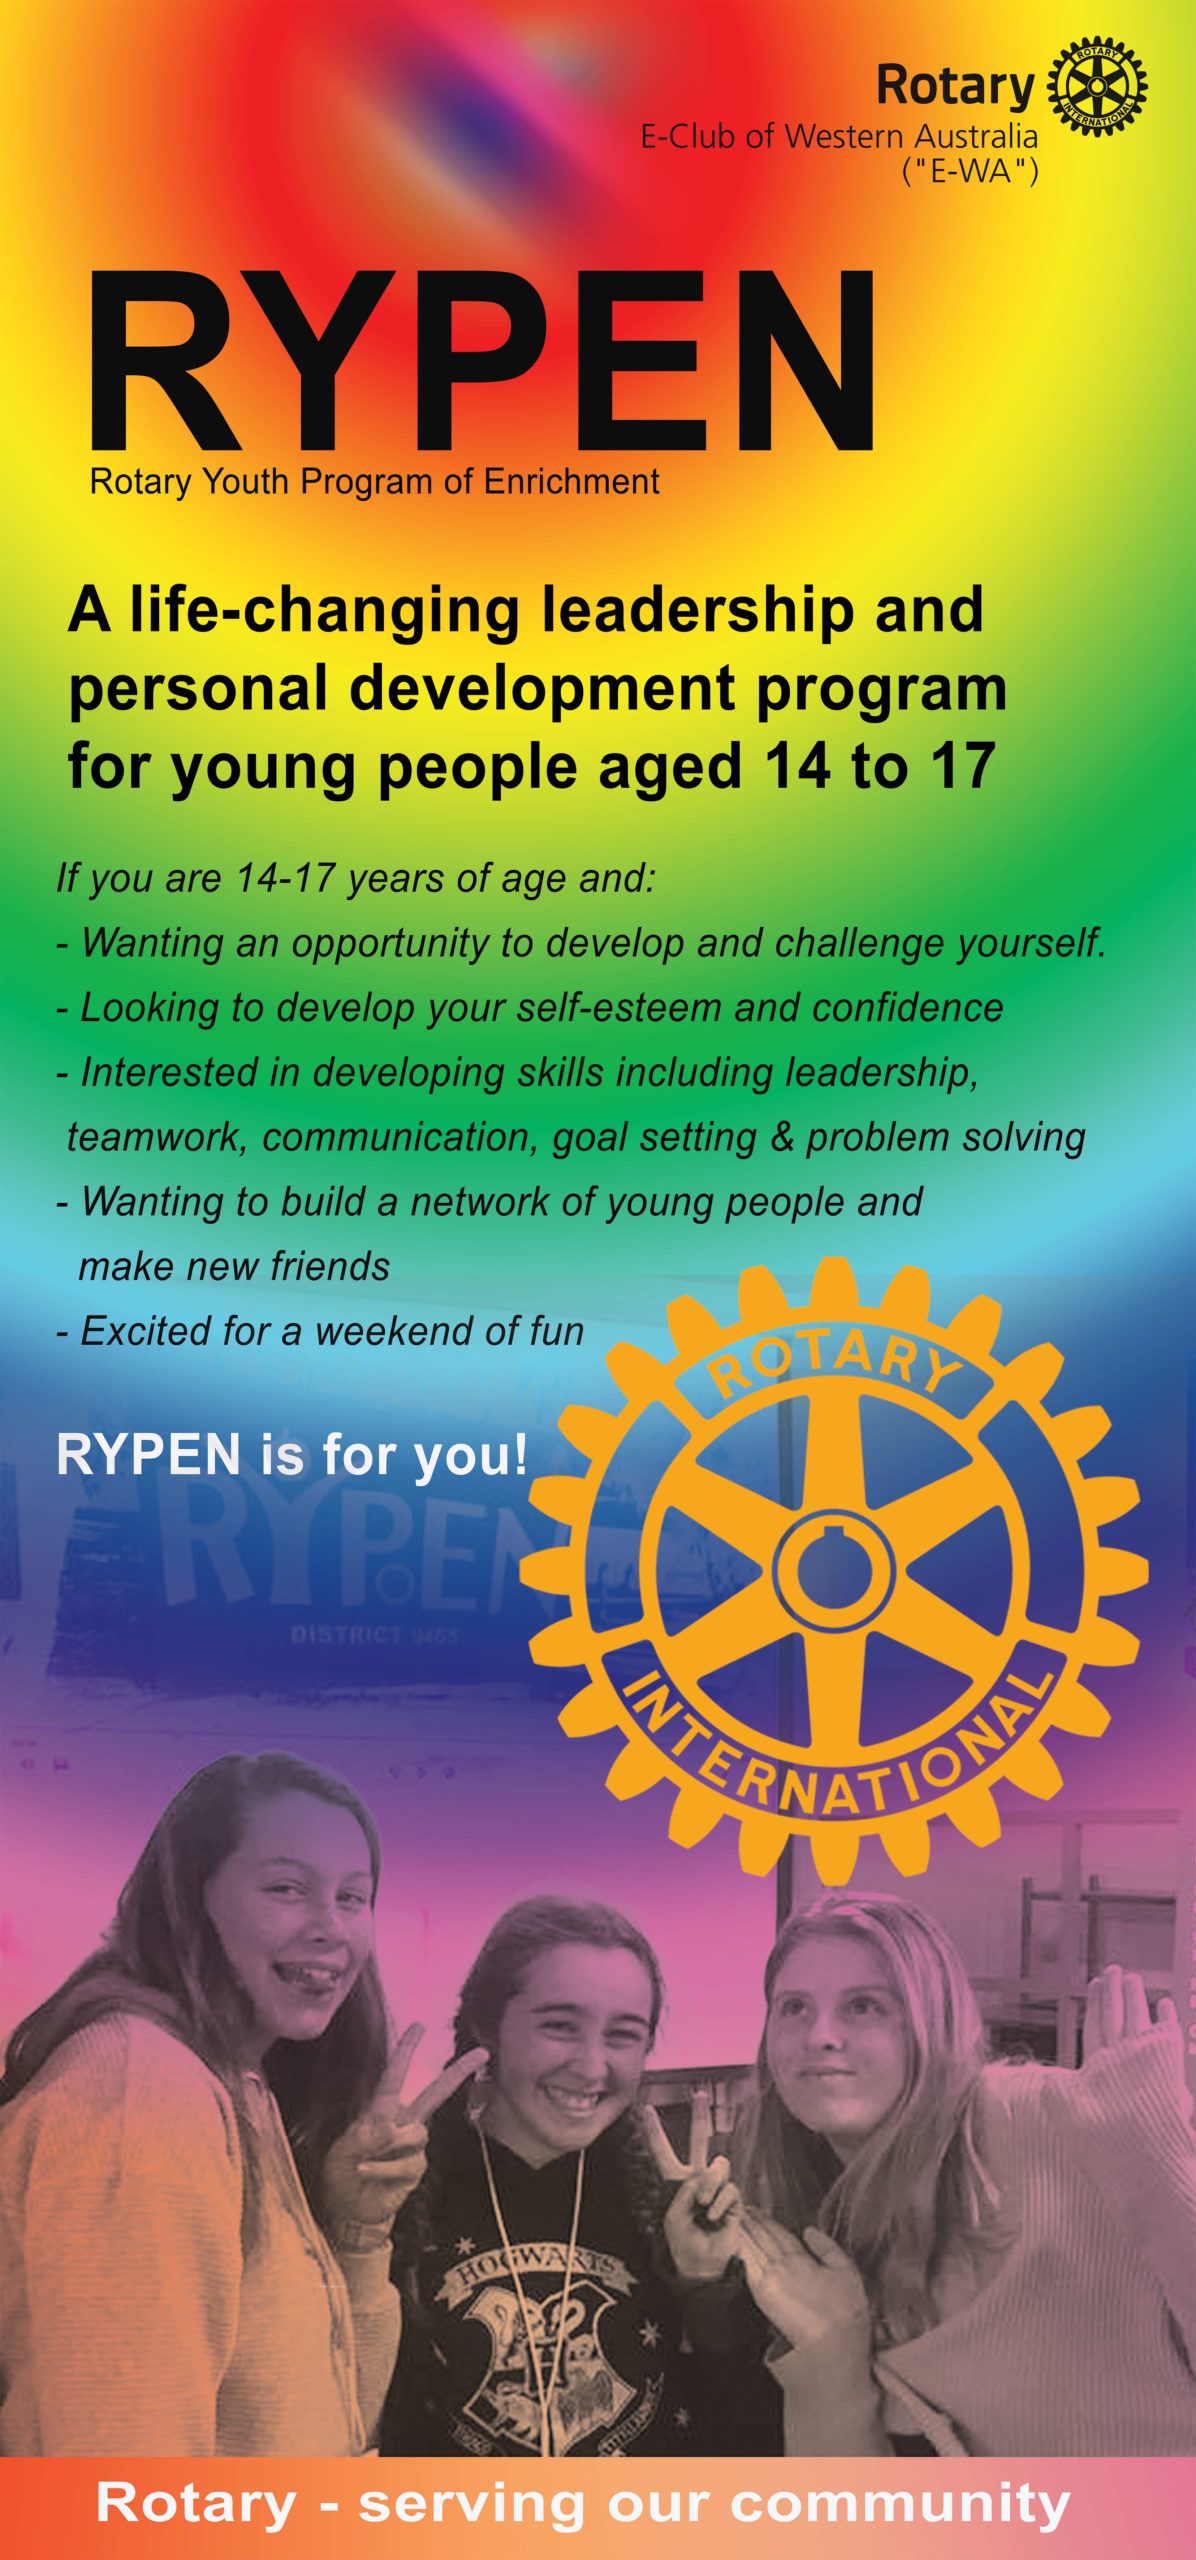 the banner we use to promote the RYPEN youth development program